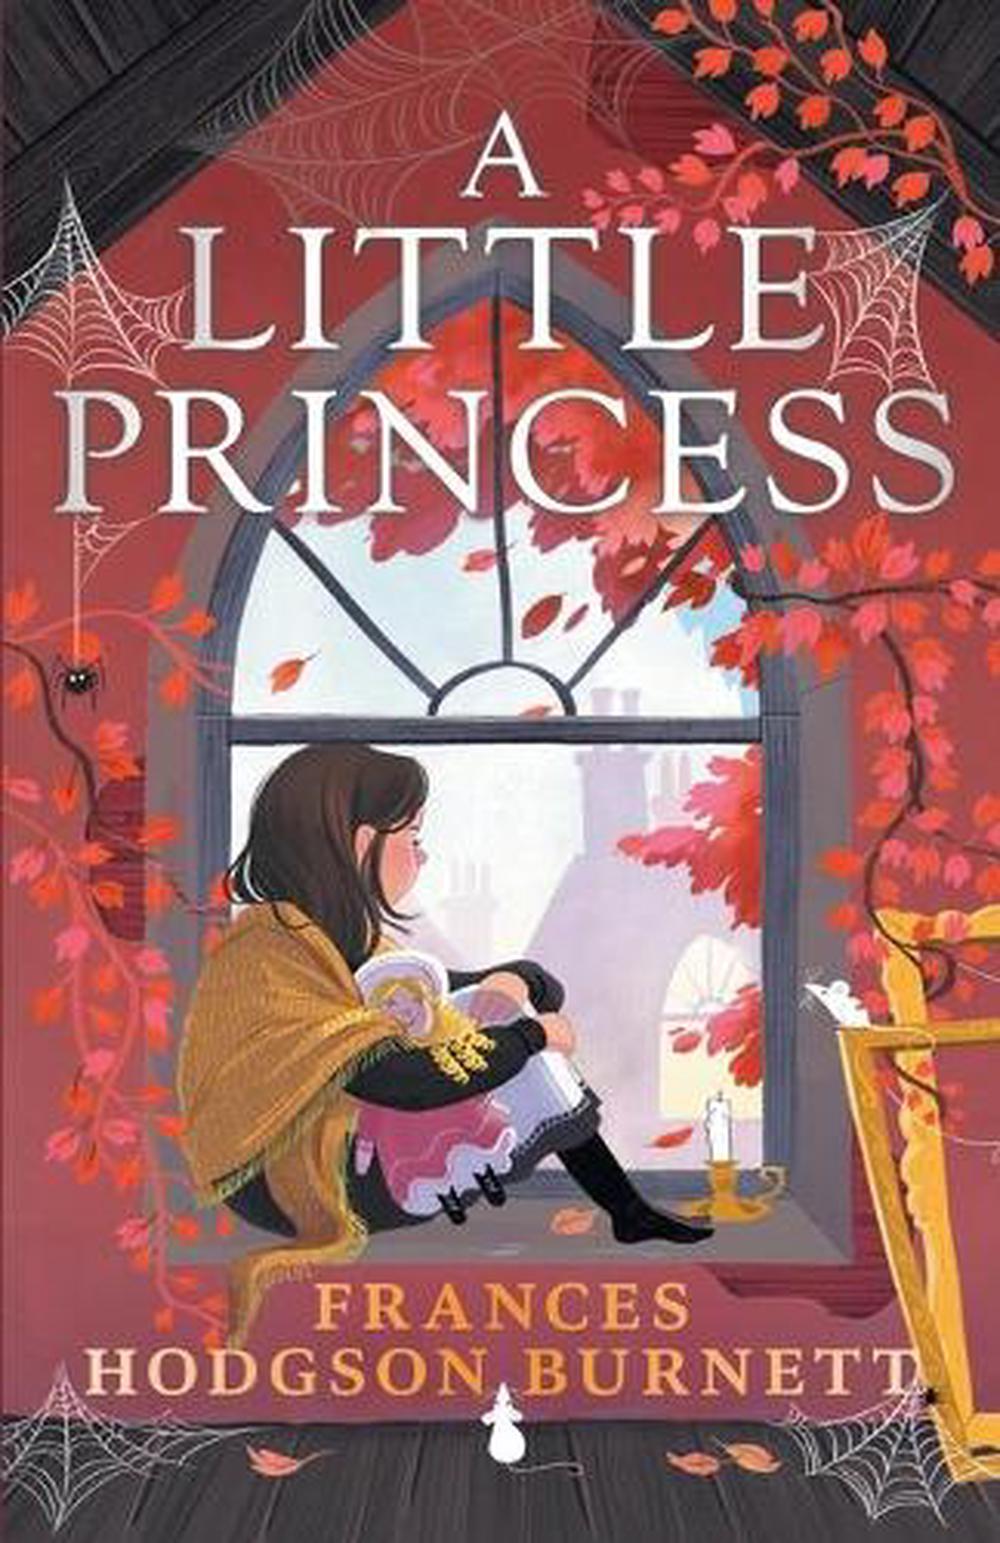 the little princess book marion crawford